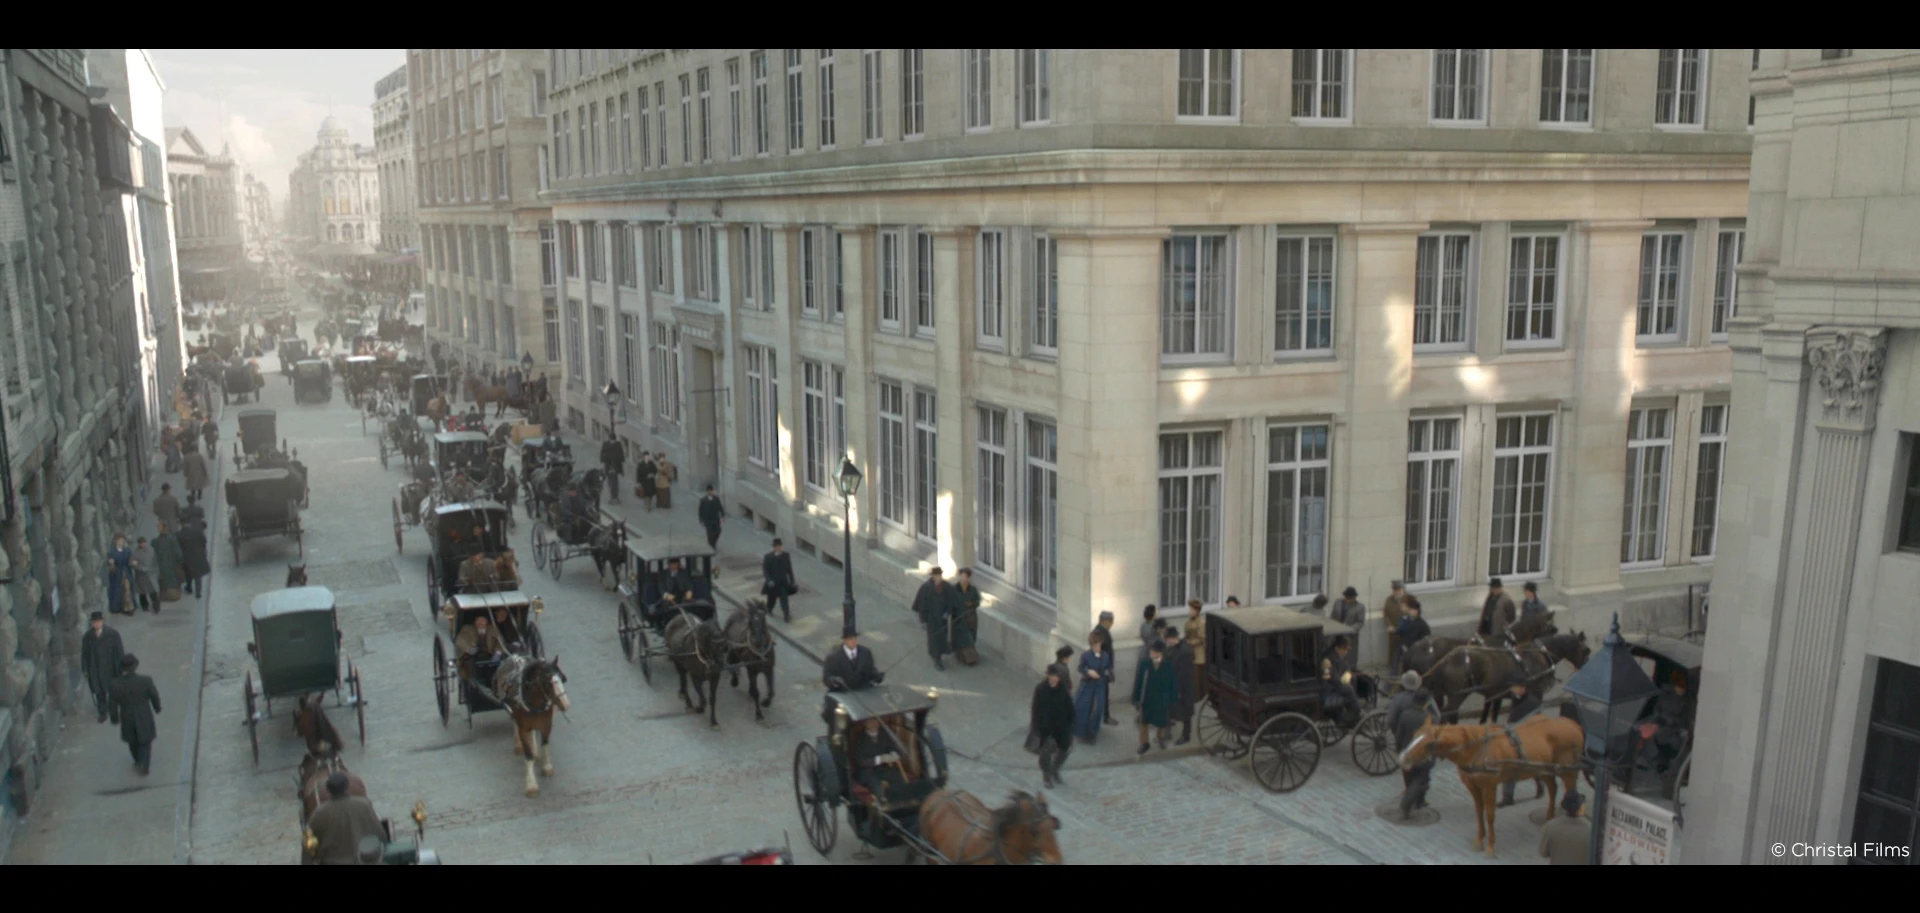  Louis Cyr view horse-drawn carriage shot from Raynault vfx 